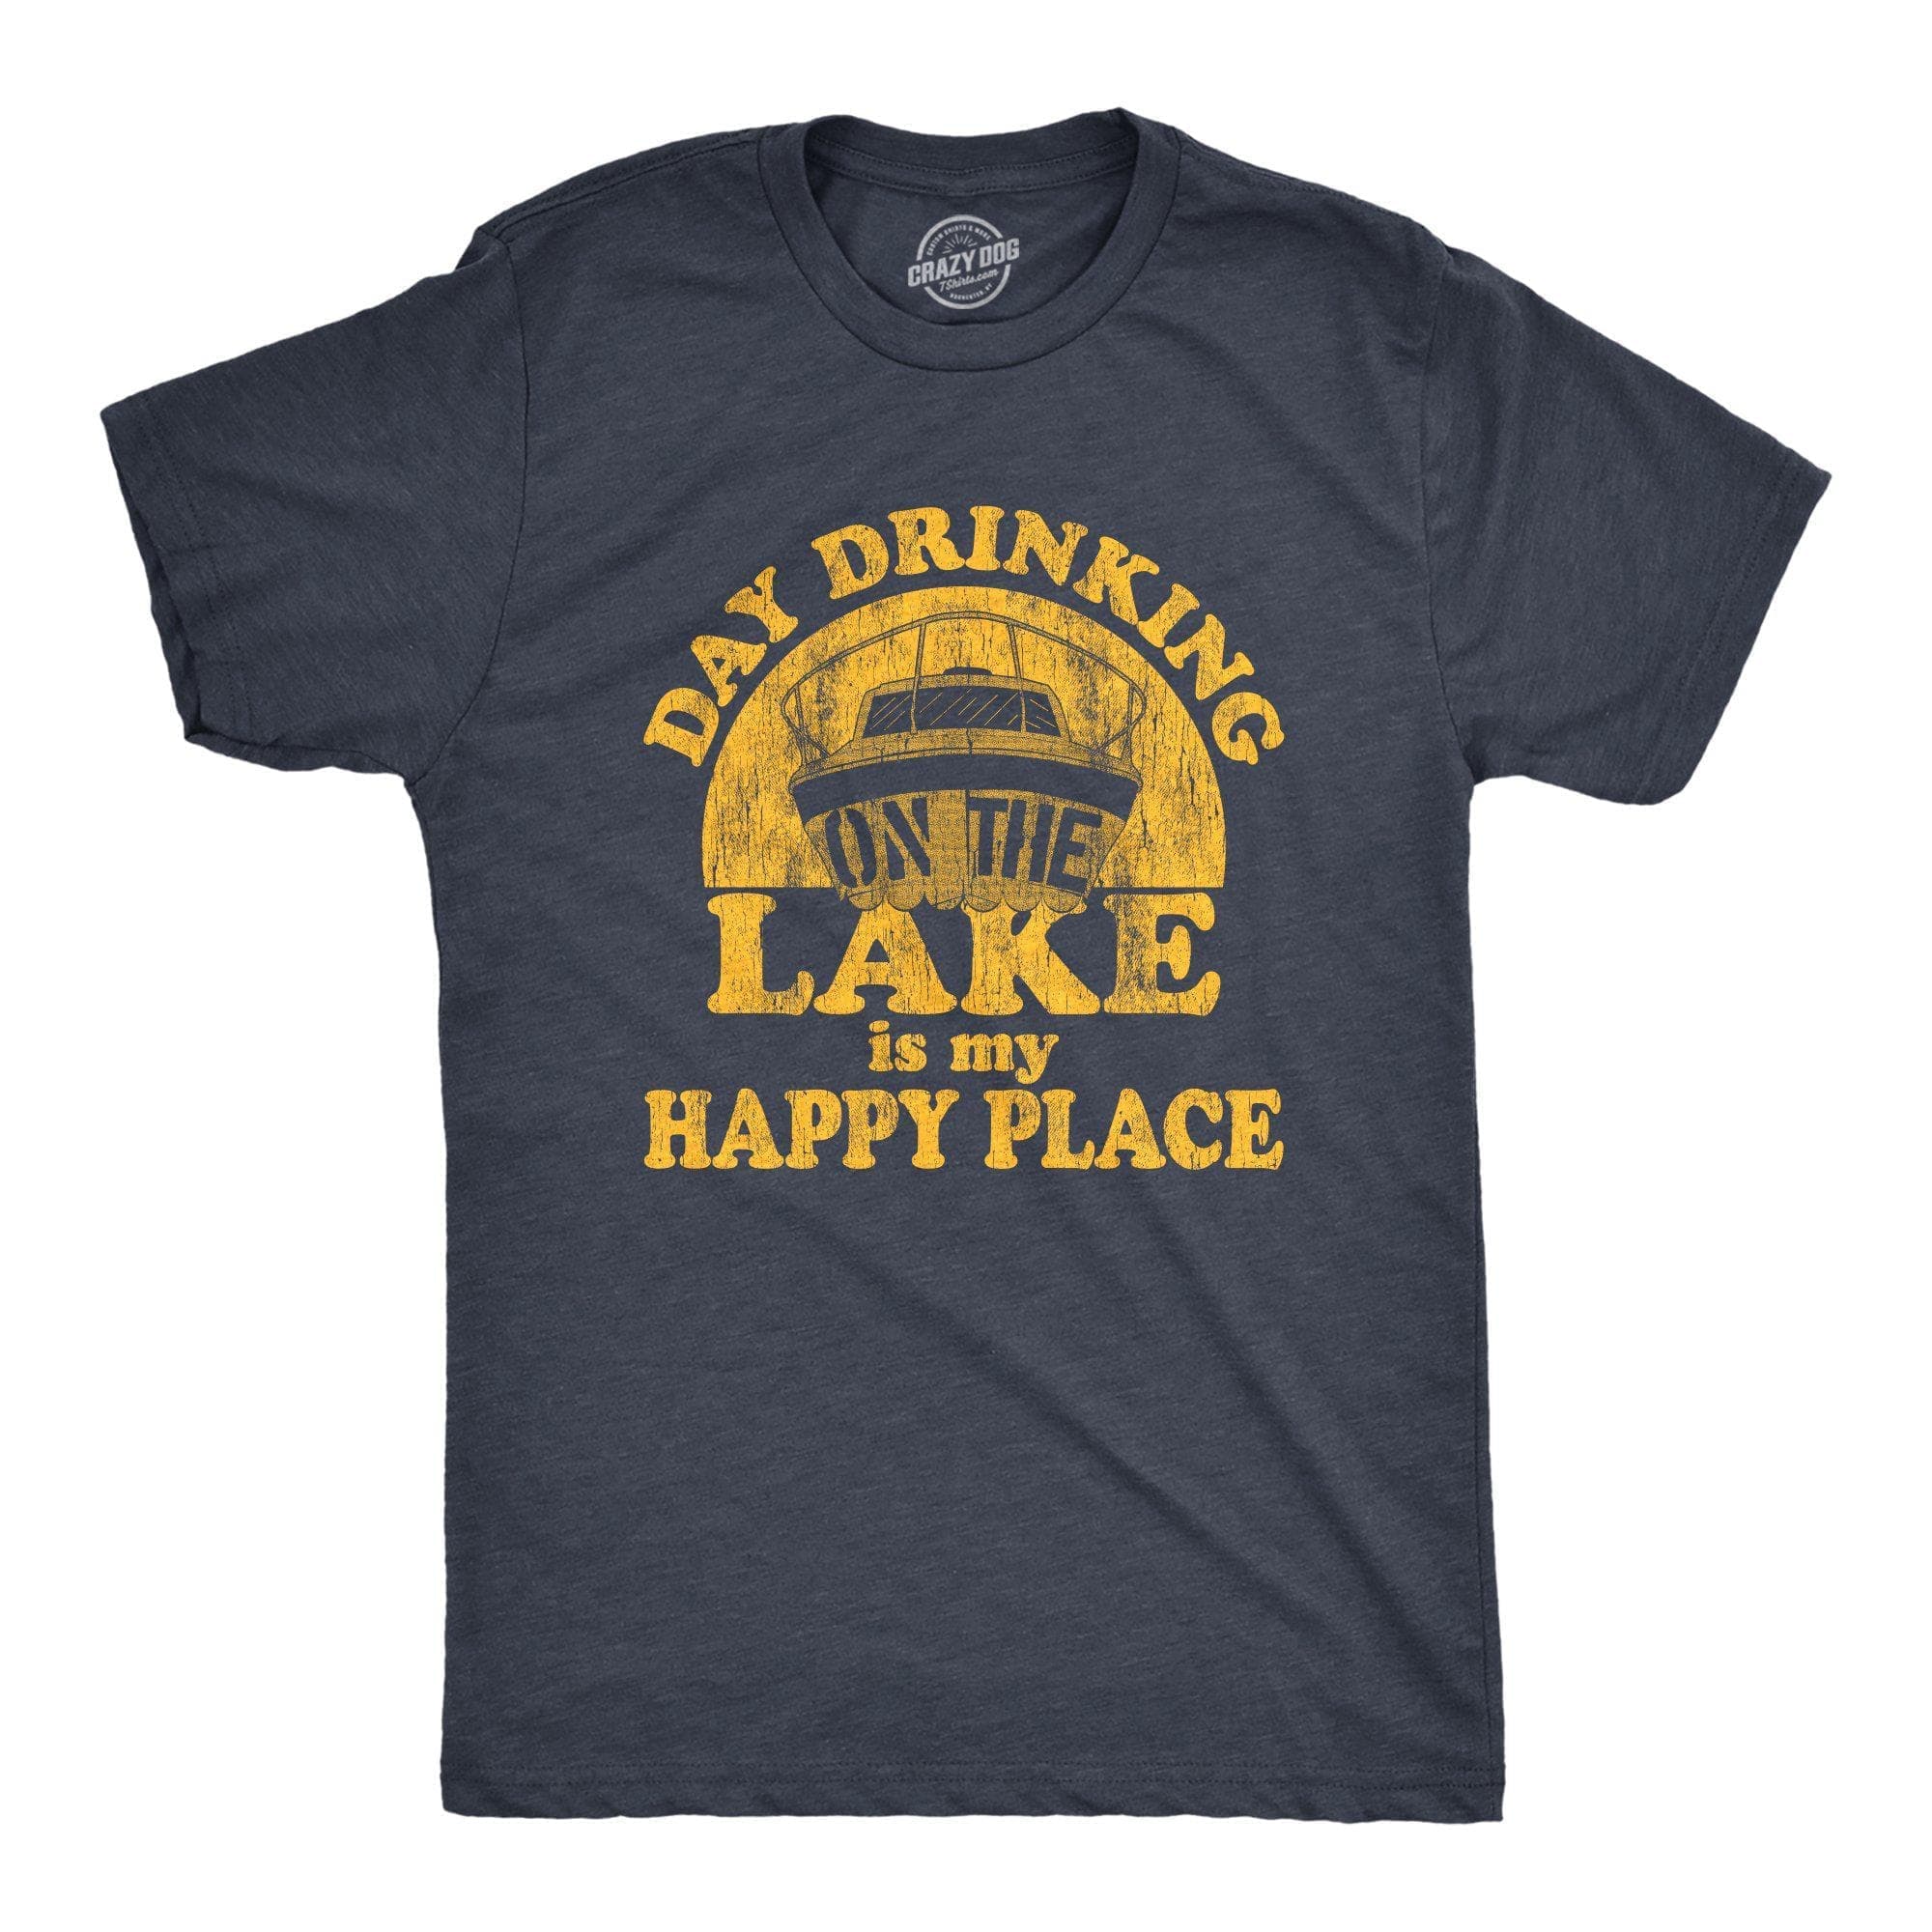 Day Drinking On The Lake Is My Happy Place Men's Tshirt - Crazy Dog T-Shirts